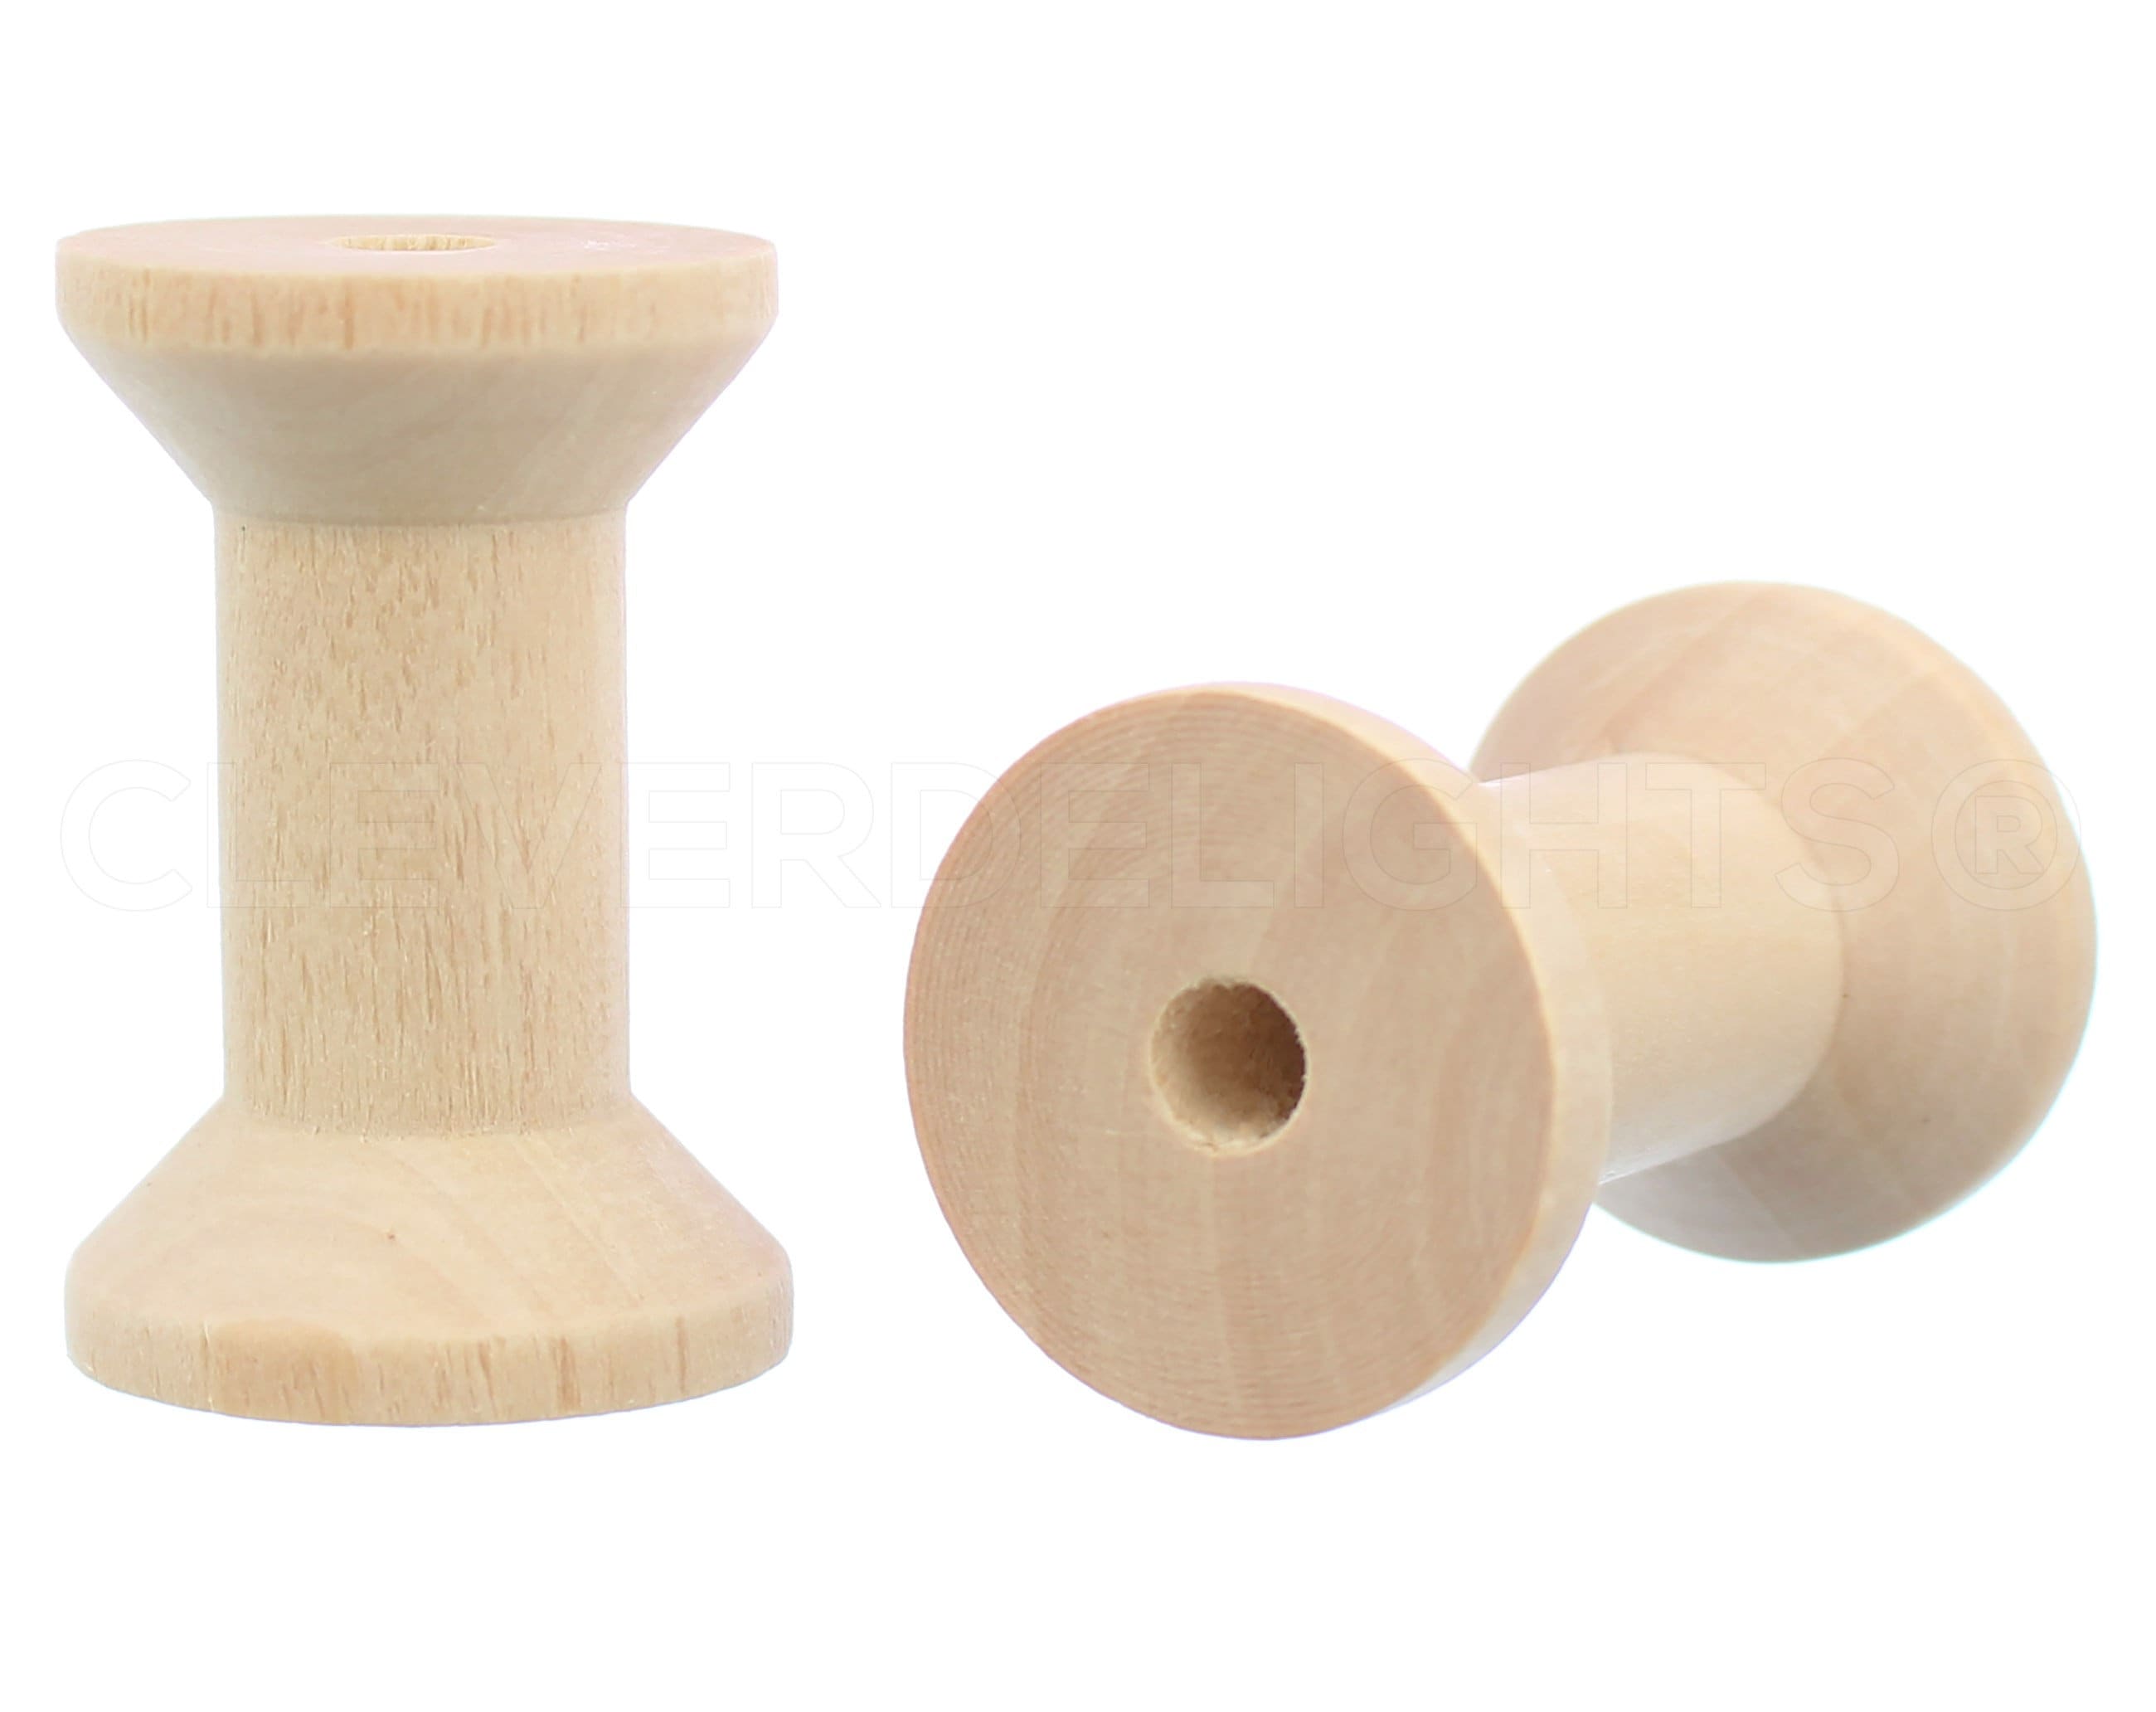 Large Unfinished Wooden Spools for Crafts (1.5 x 2 Inches, 40 Pack) 